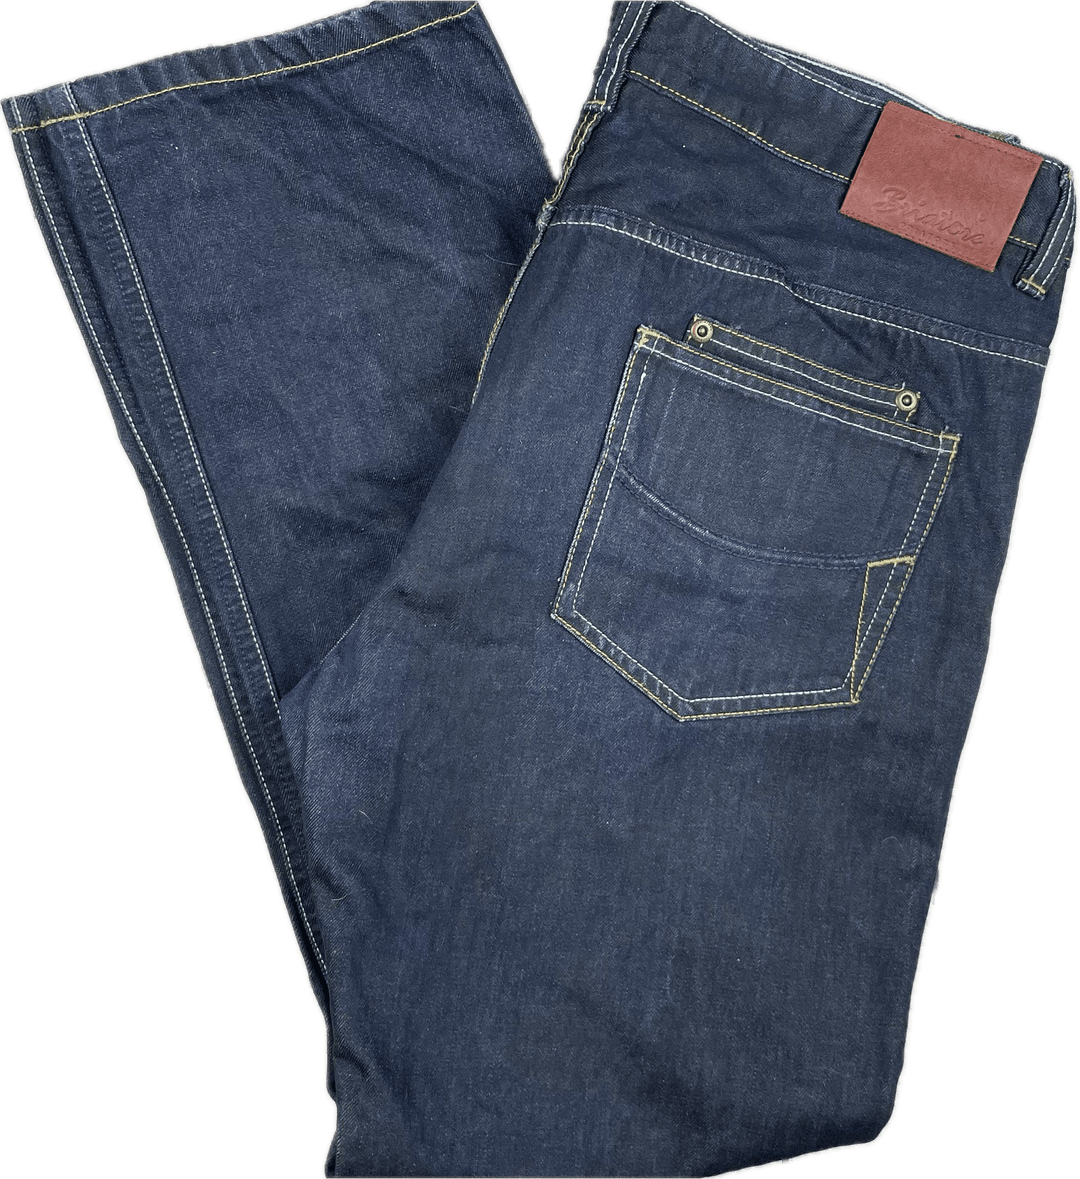 Briatore Italy Mens Classic Straight Handmade Tailored Jeans - Size 36 - Jean Pool